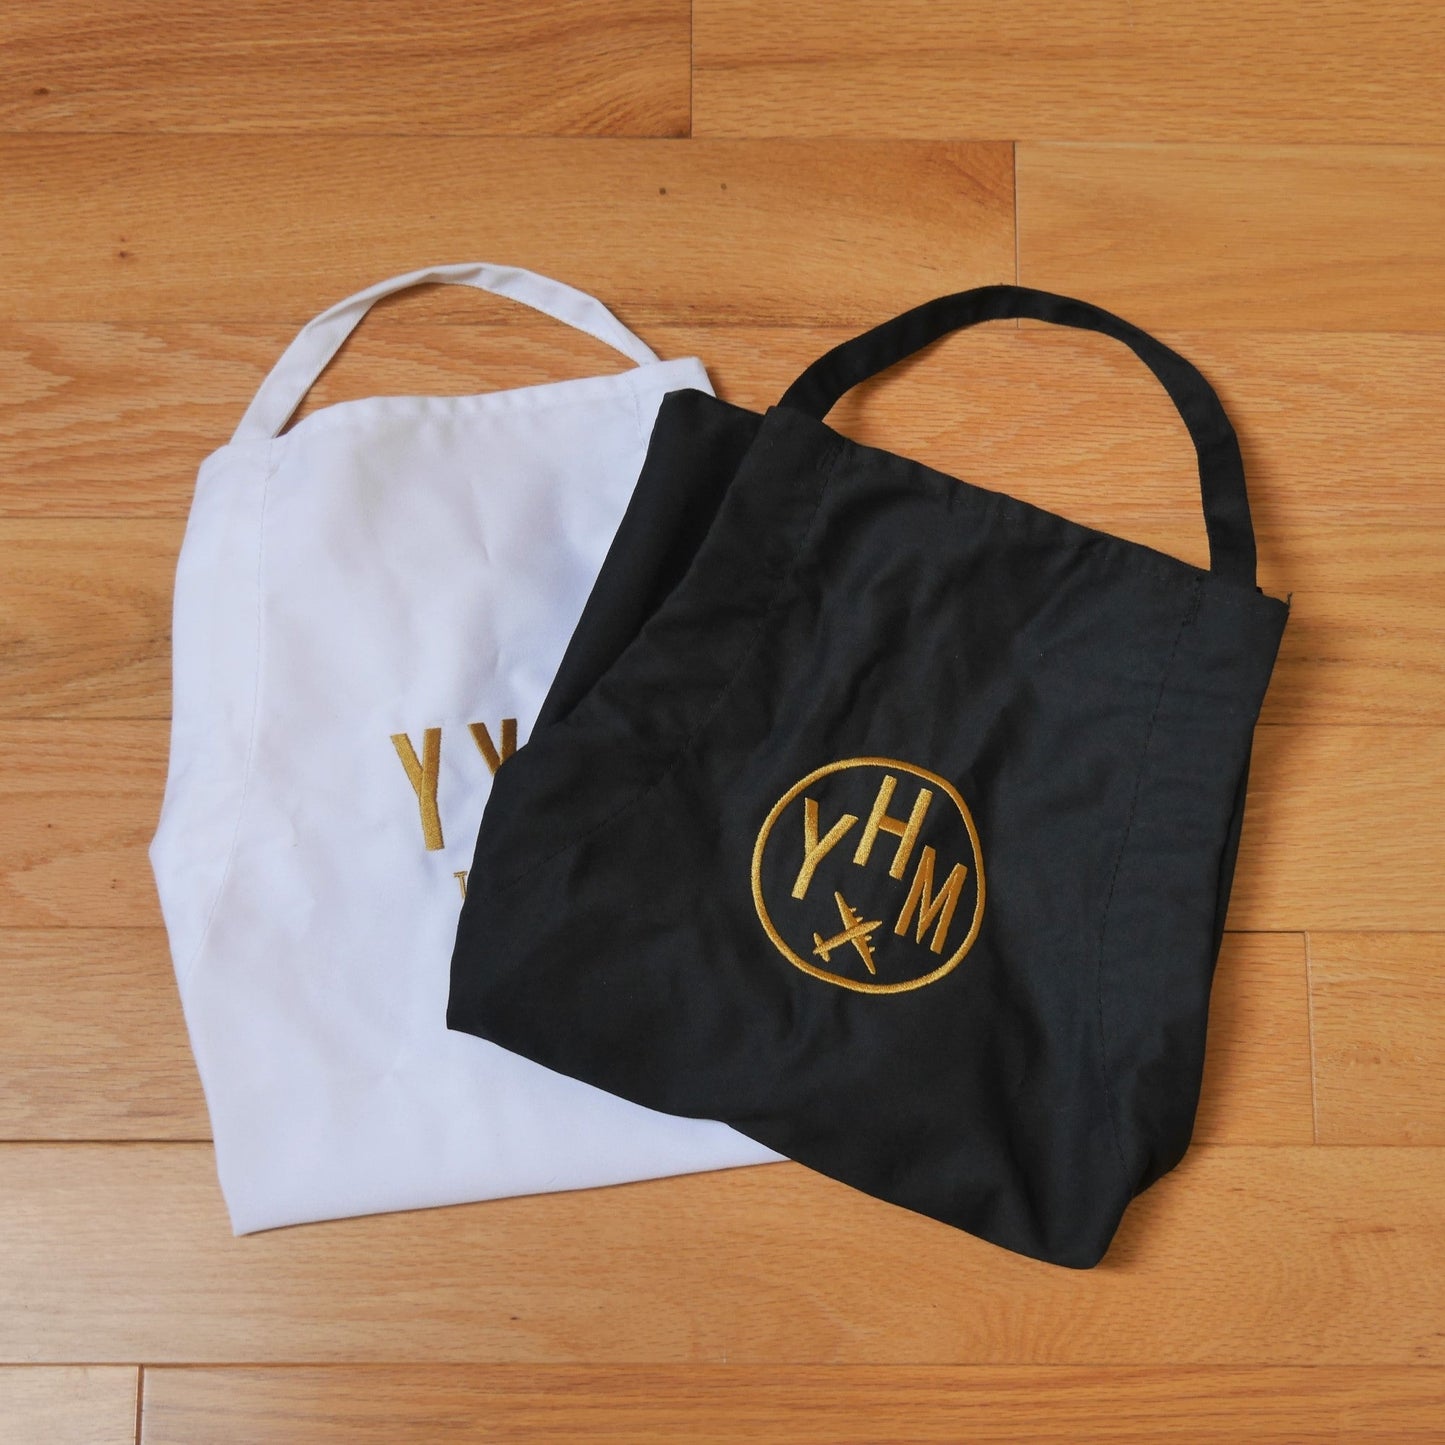 City Embroidered Apron - Old Gold • MKE Milwaukee • YHM Designs - Image 14